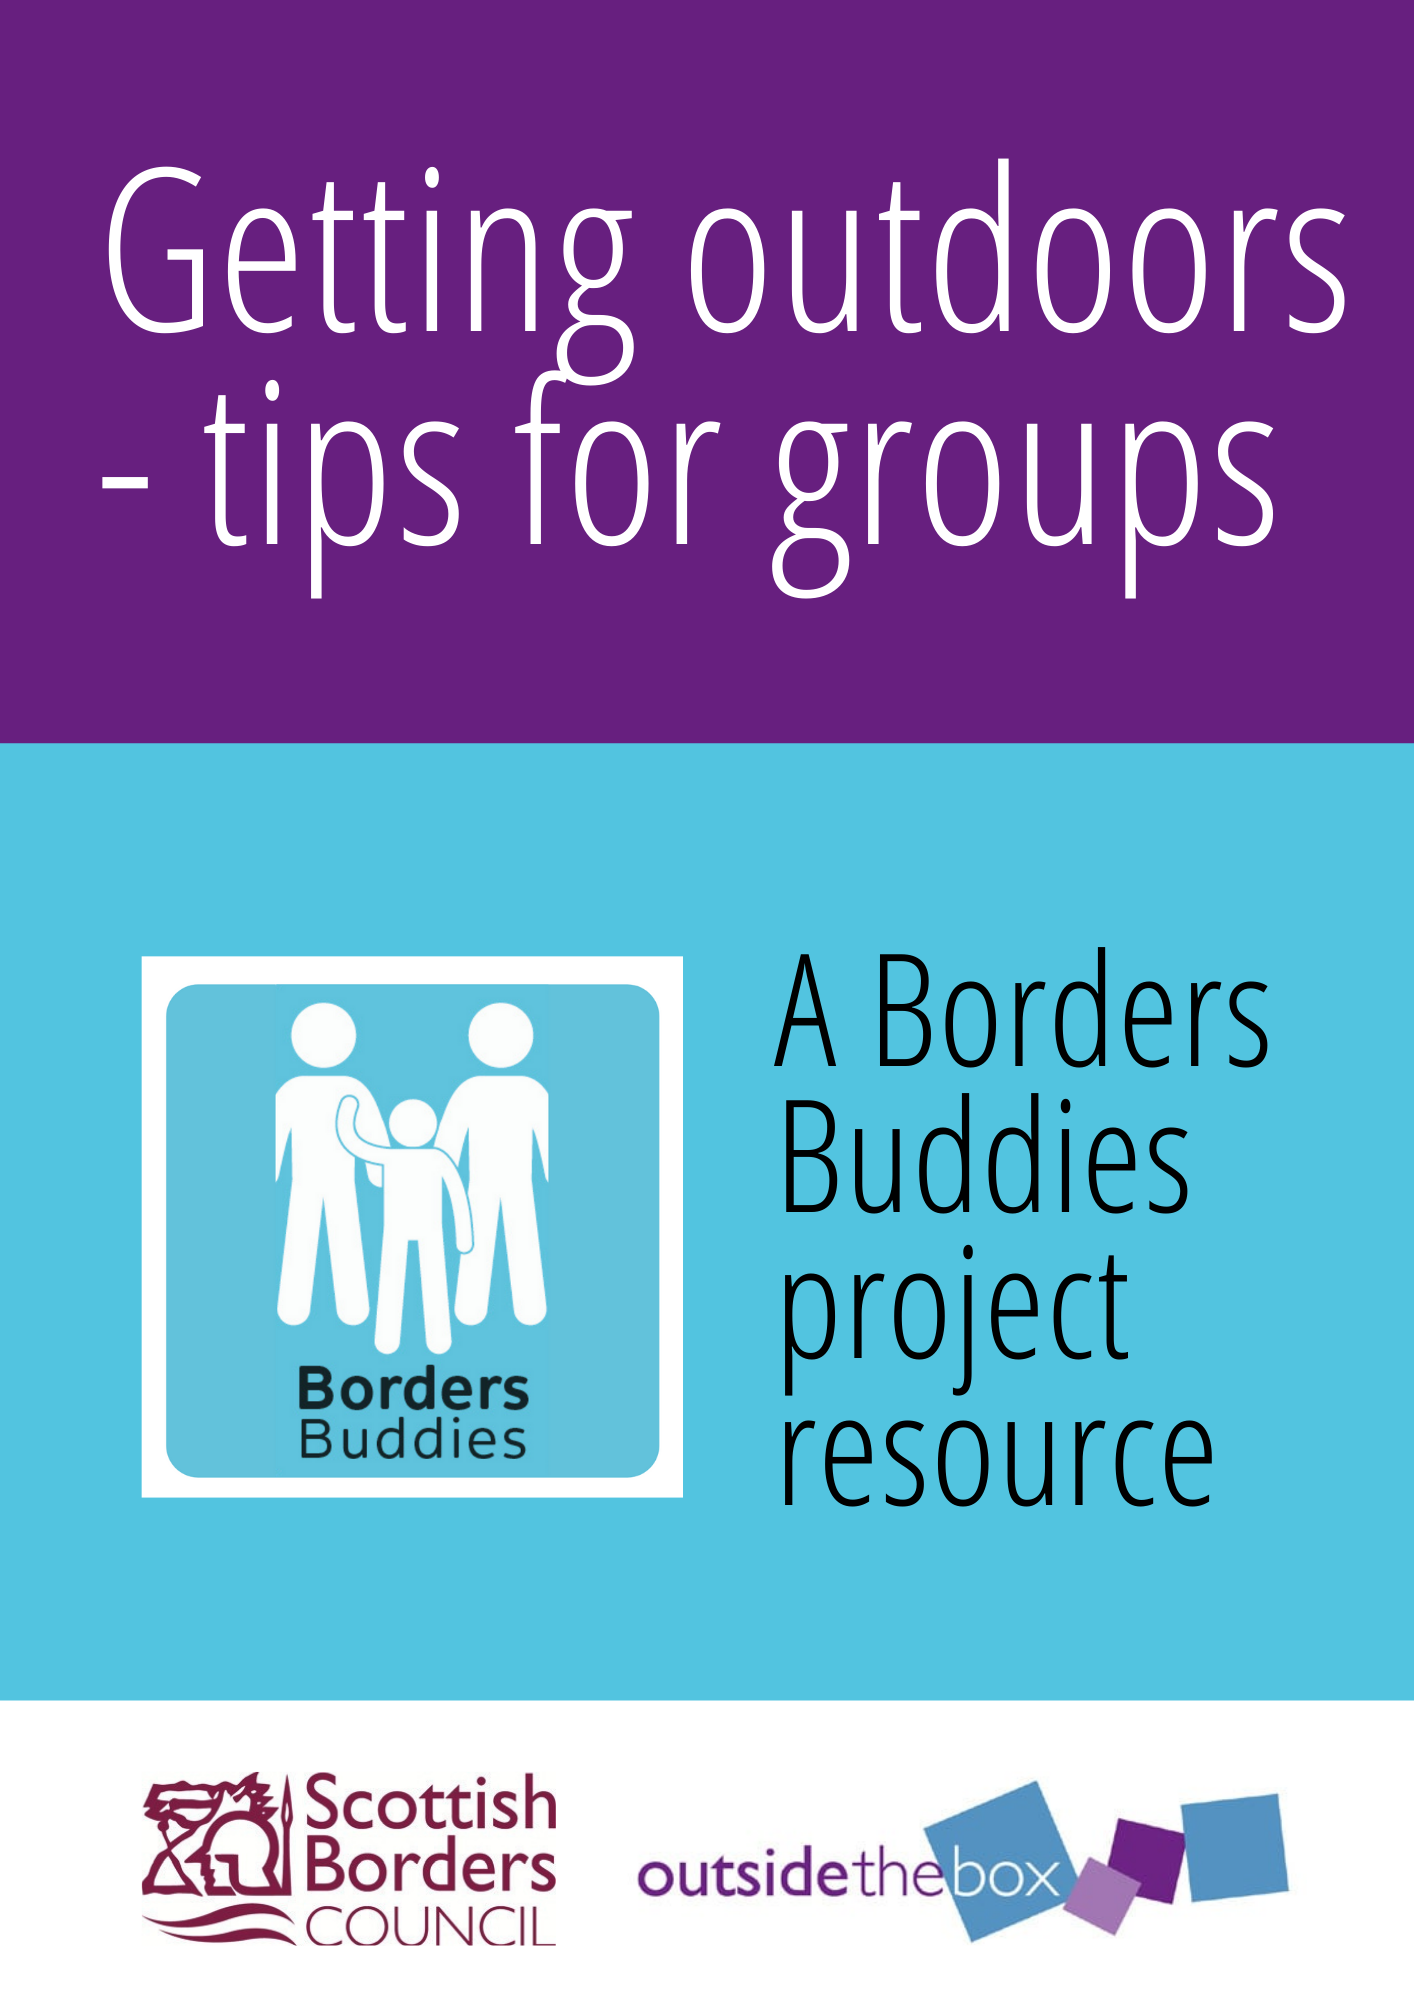 Getting outdoors - tips for groups. A Borders Buddies project resource